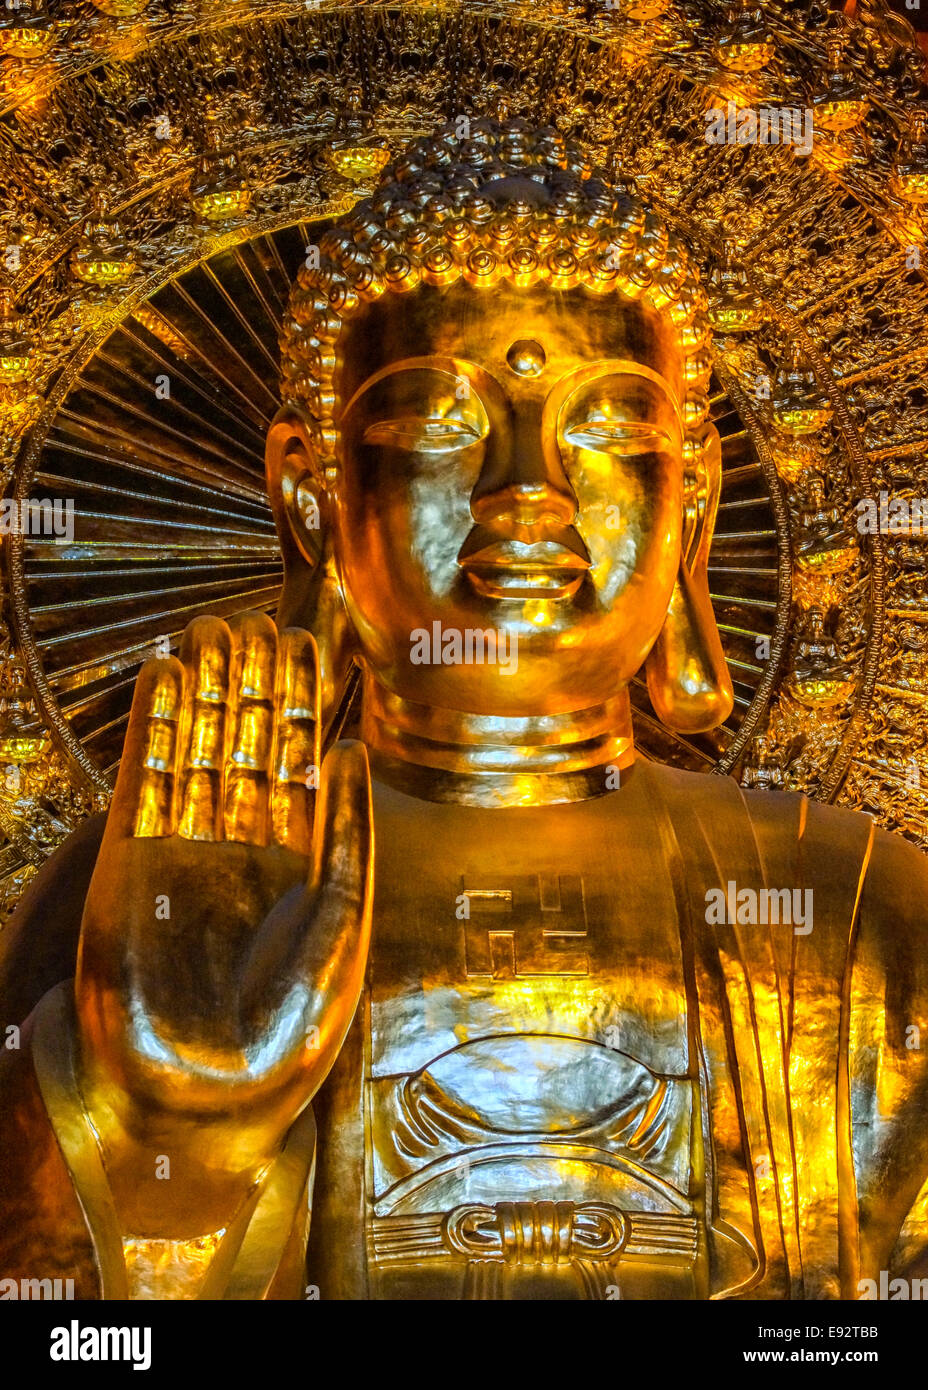 Frontal view of Buddha face, hand gesture and bust. Stock Photo